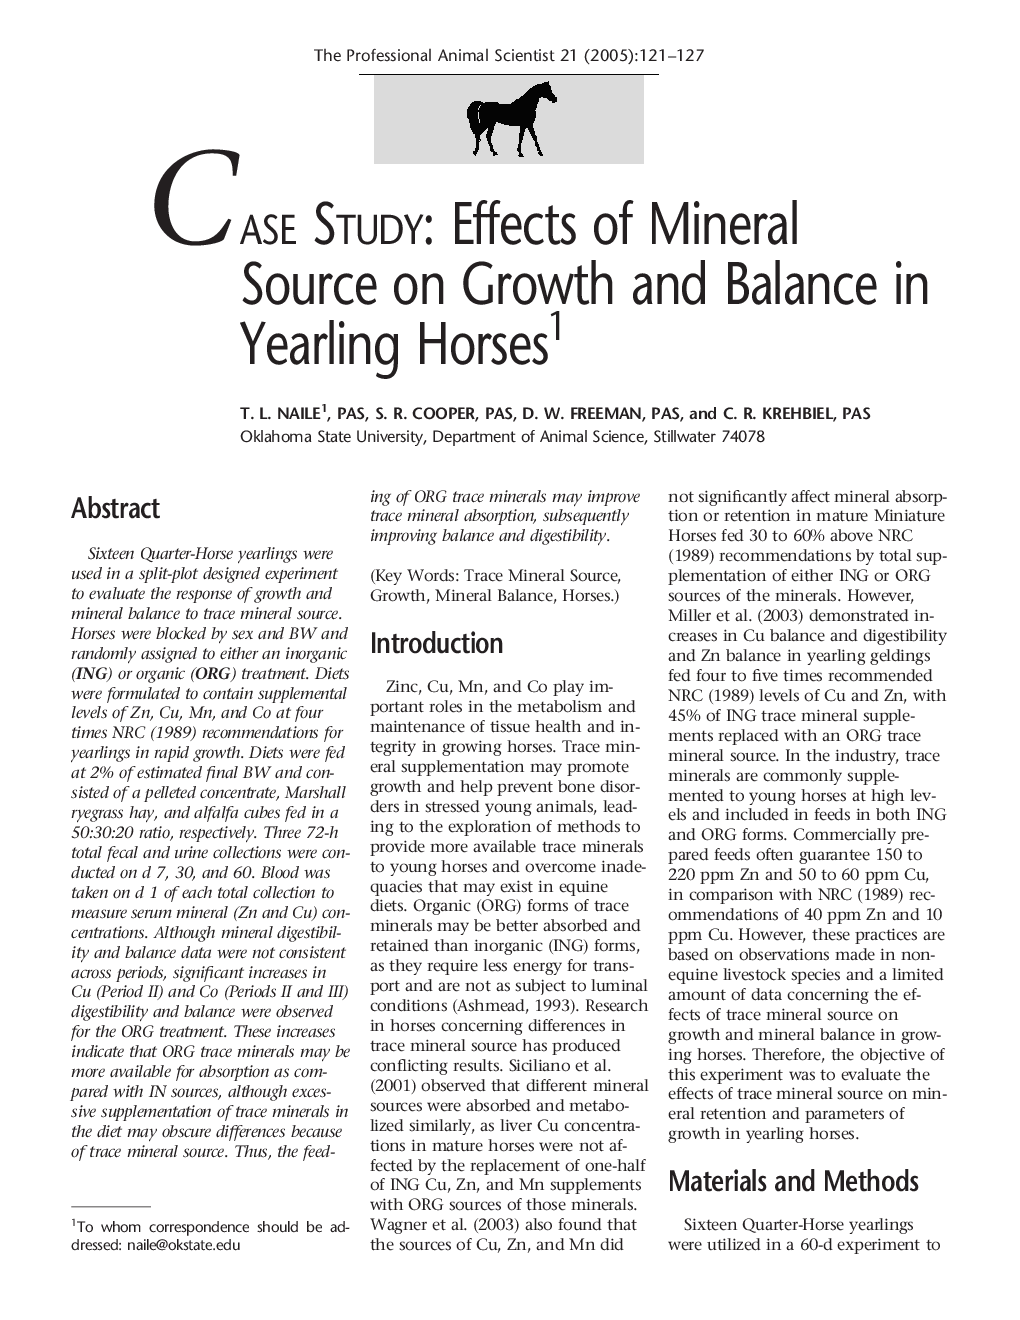 Effects of Mineral Source on Growth and Balance in Yearling Horses1